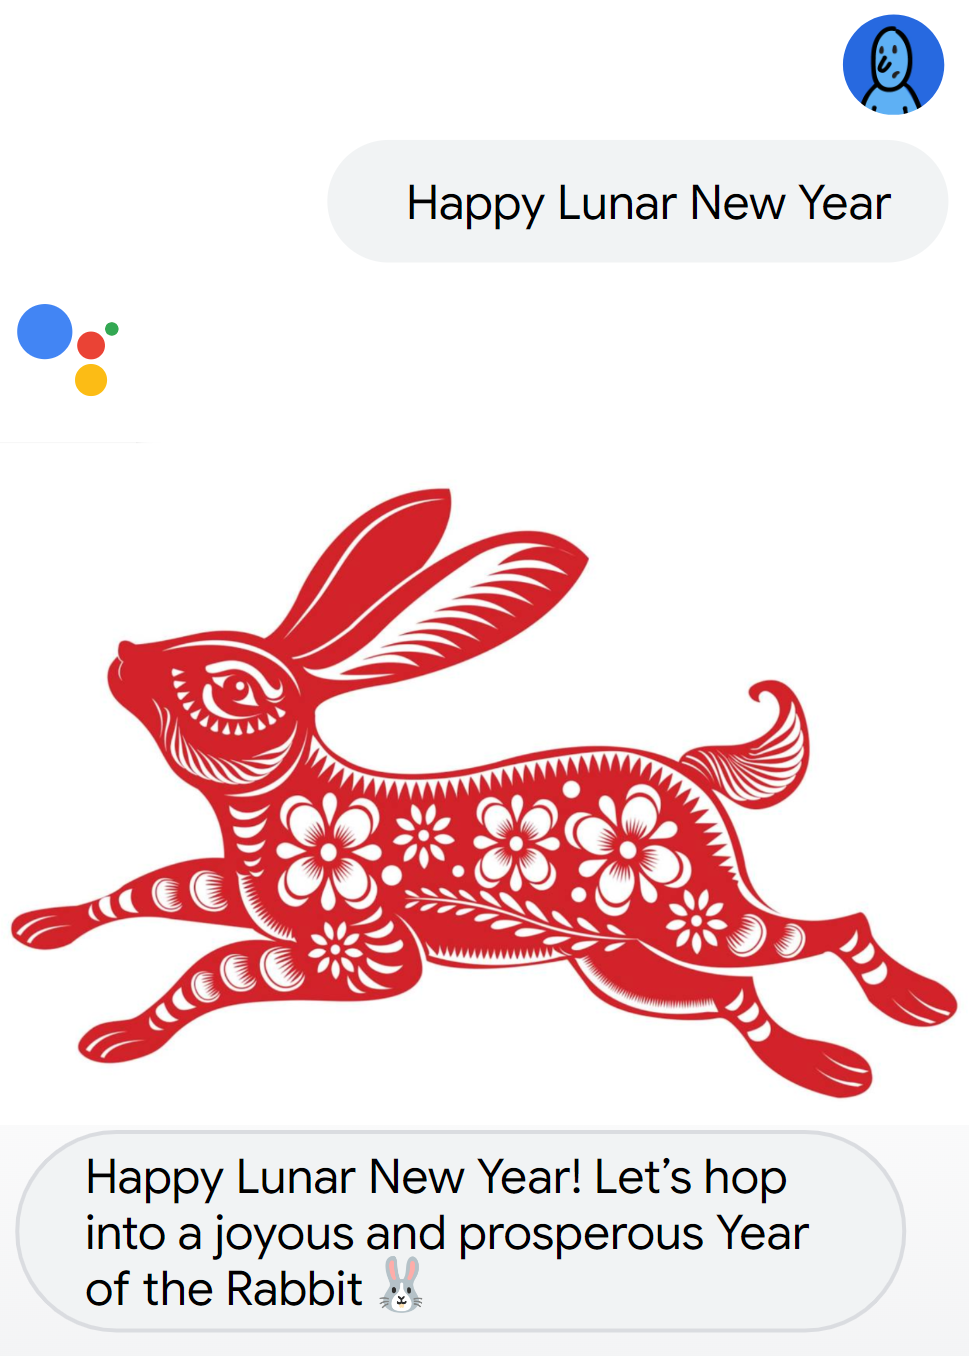 Chinese new year 2023 frame - Apps on Google Play